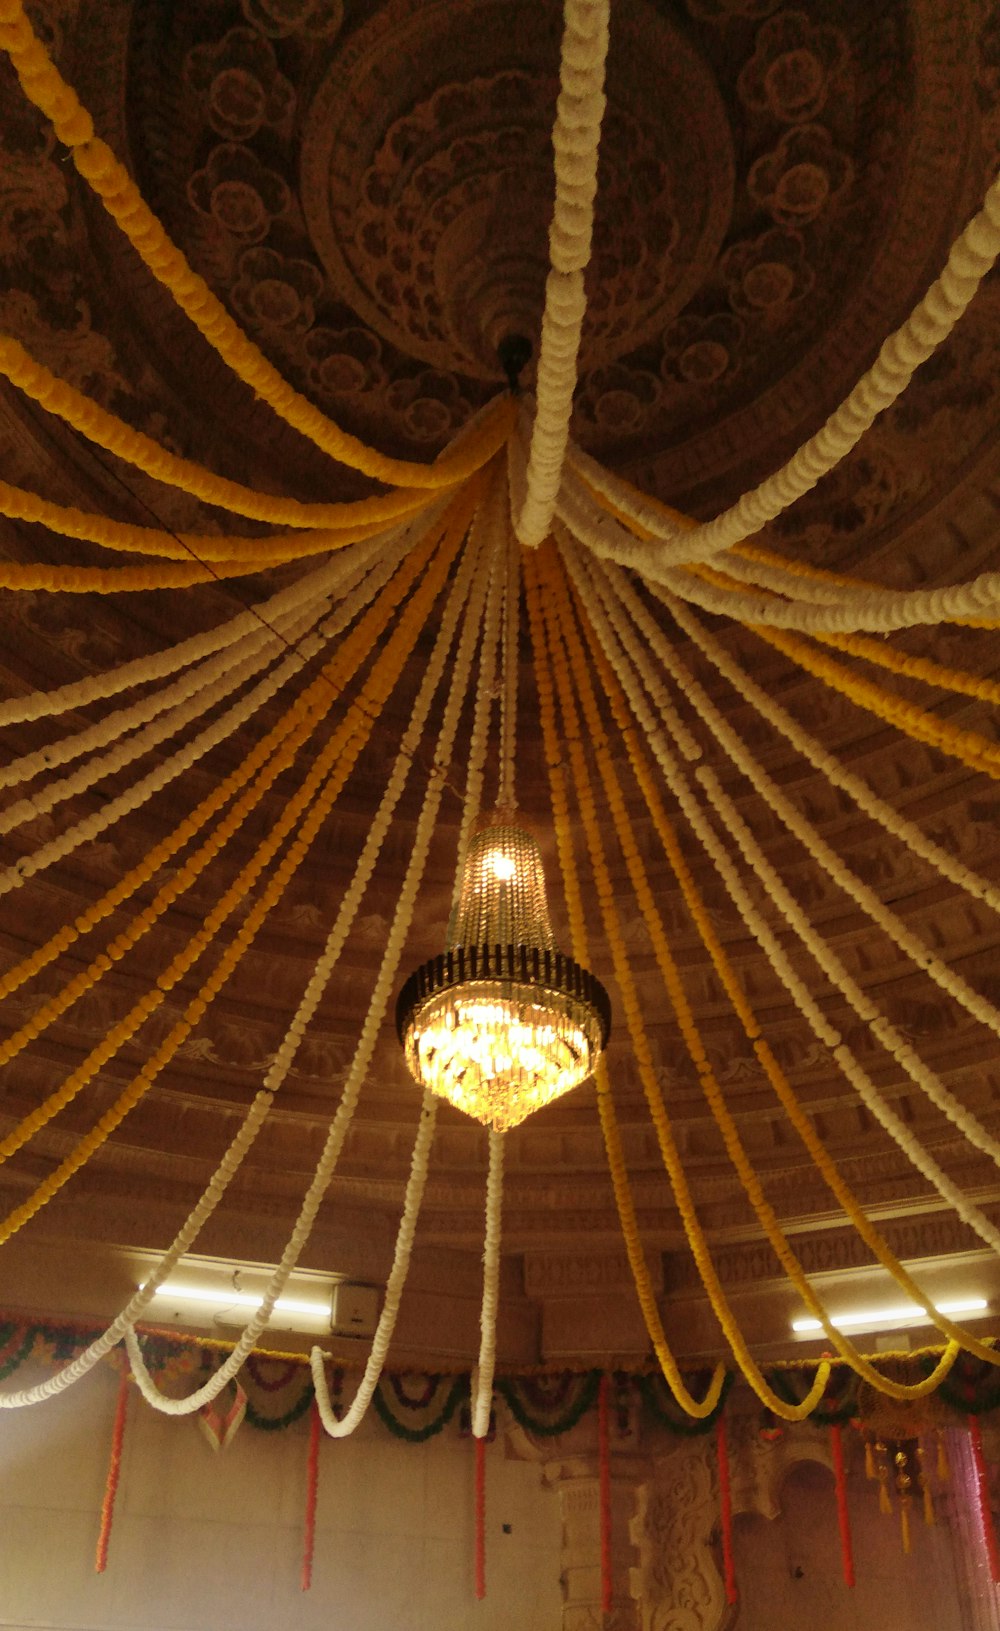 a chandelier hanging from the ceiling of a room